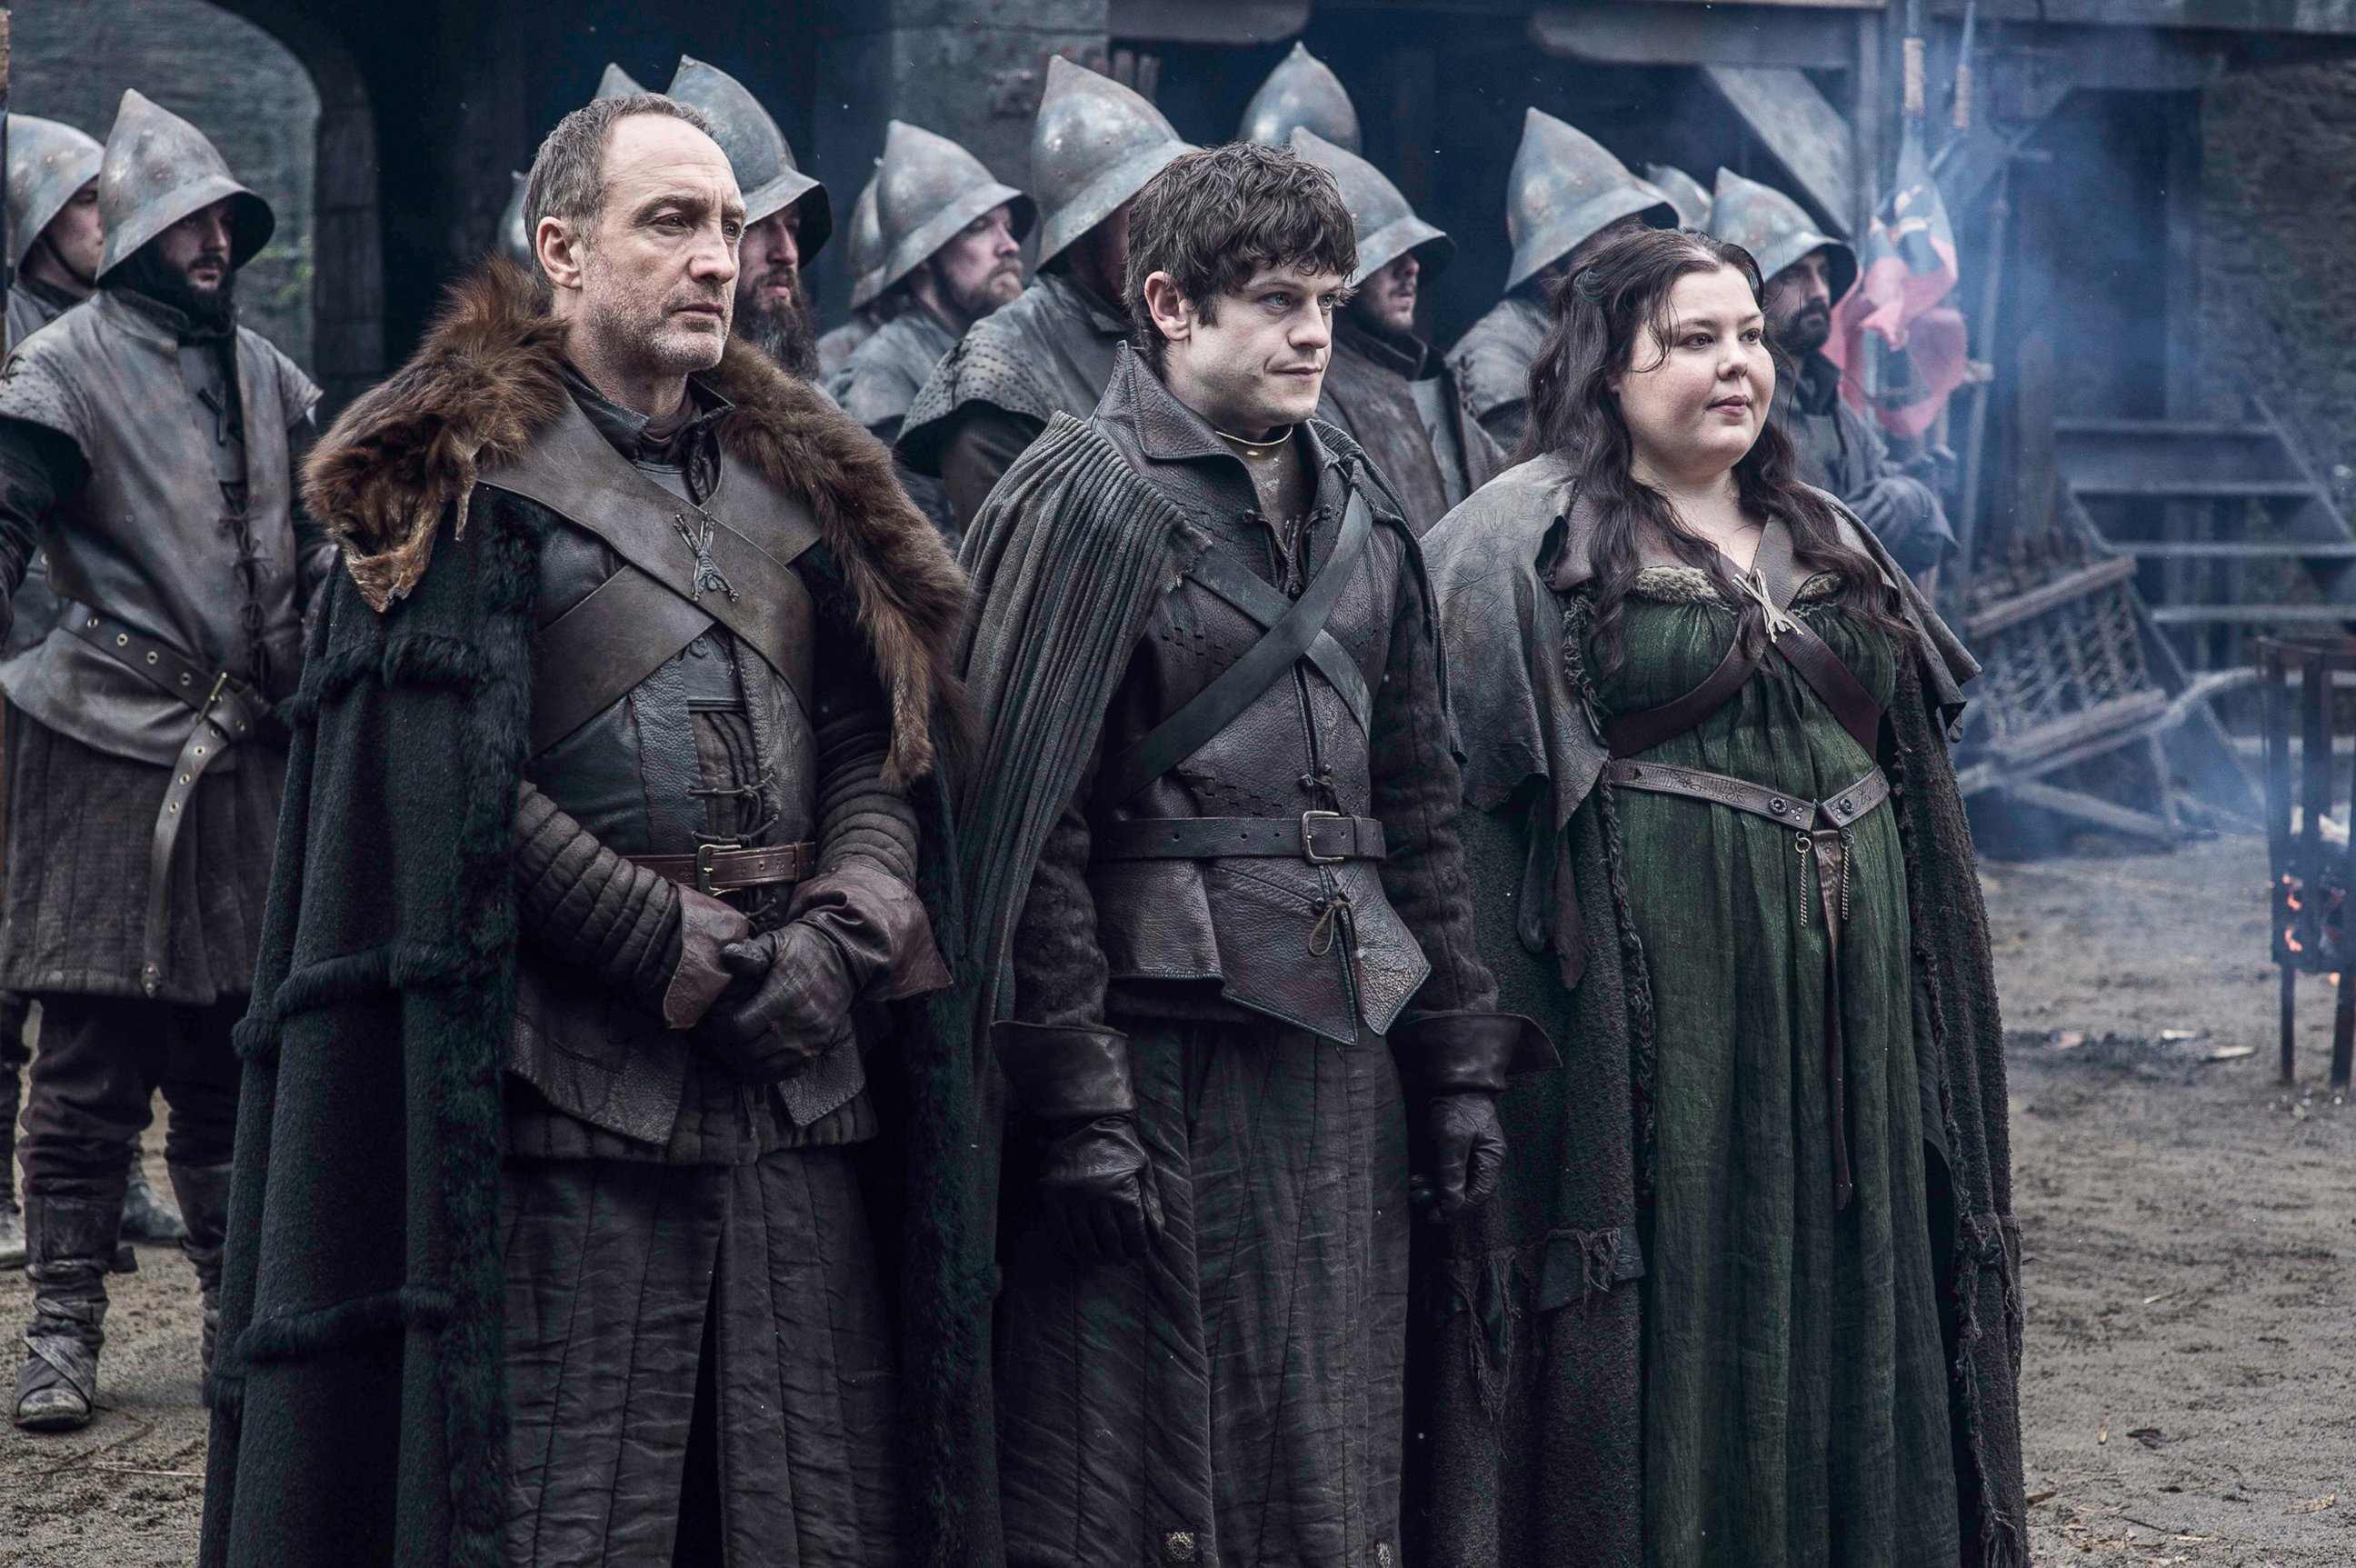 PHOTO: Iwan Rheon, center, as Ramsey Bolton in a scene from season 5 of "Game of Thrones."